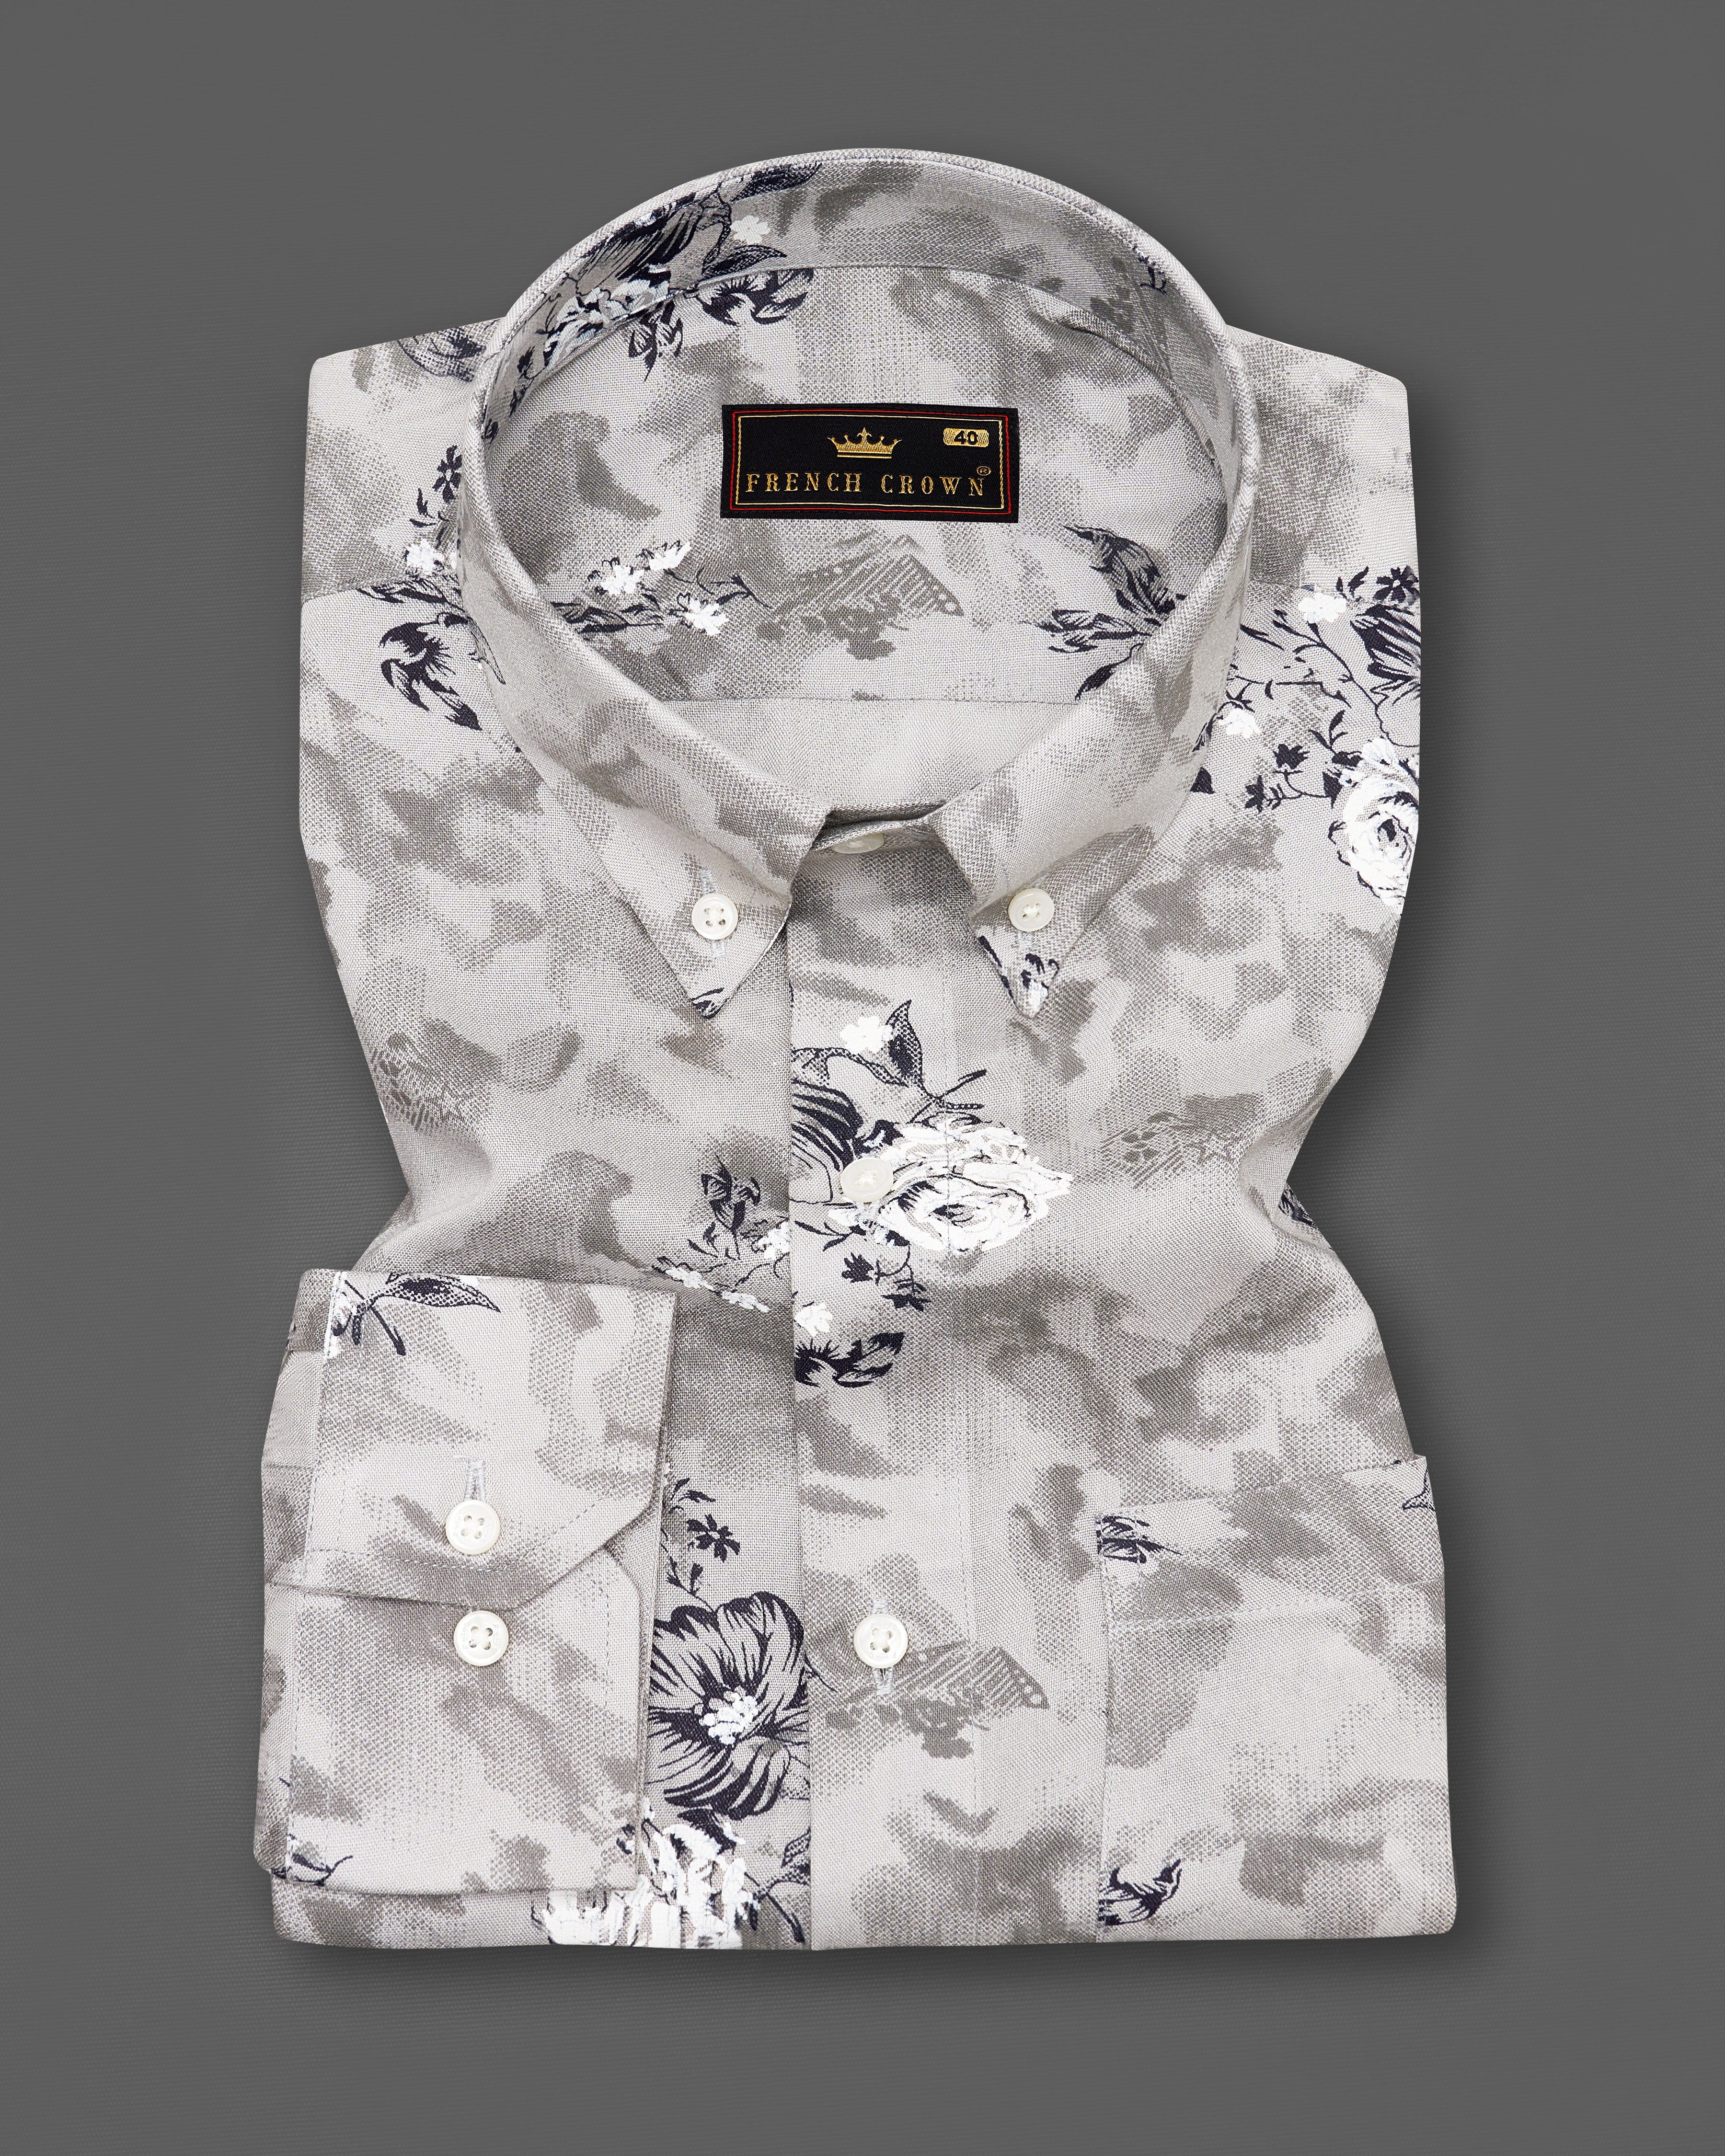 Quill Gray with Floral Printed Premium Tencel Shirt 9208-BD-38,9208-BD-H-38,9208-BD-39,9208-BD-H-39,9208-BD-40,9208-BD-H-40,9208-BD-42,9208-BD-H-42,9208-BD-44,9208-BD-H-44,9208-BD-46,9208-BD-H-46,9208-BD-48,9208-BD-H-48,9208-BD-50,9208-BD-H-50,9208-BD-52,9208-BD-H-52